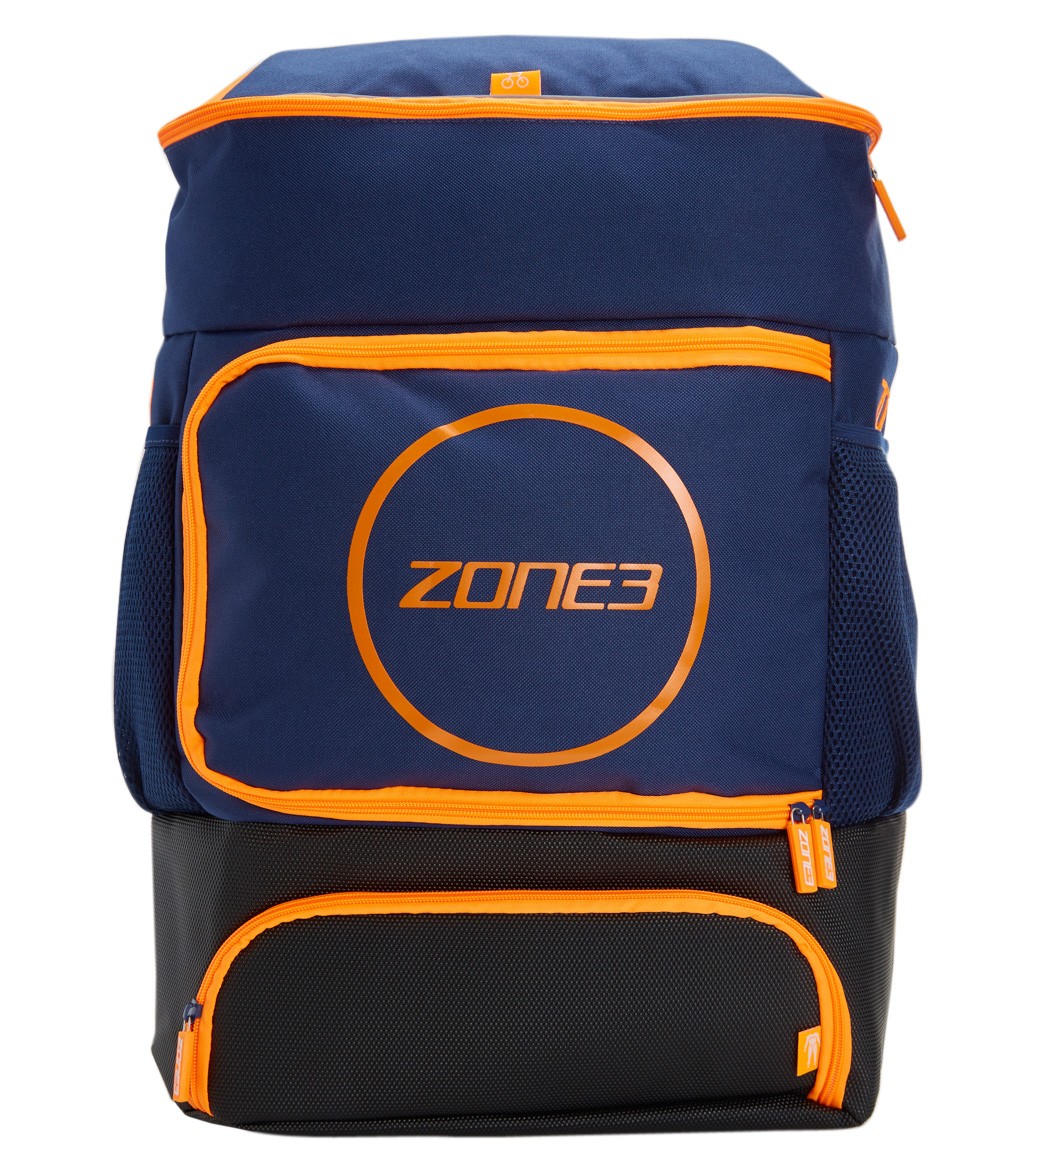 Zone3 Tri Transition Backpack - Navy/Orange Polyester - Swimoutlet.com